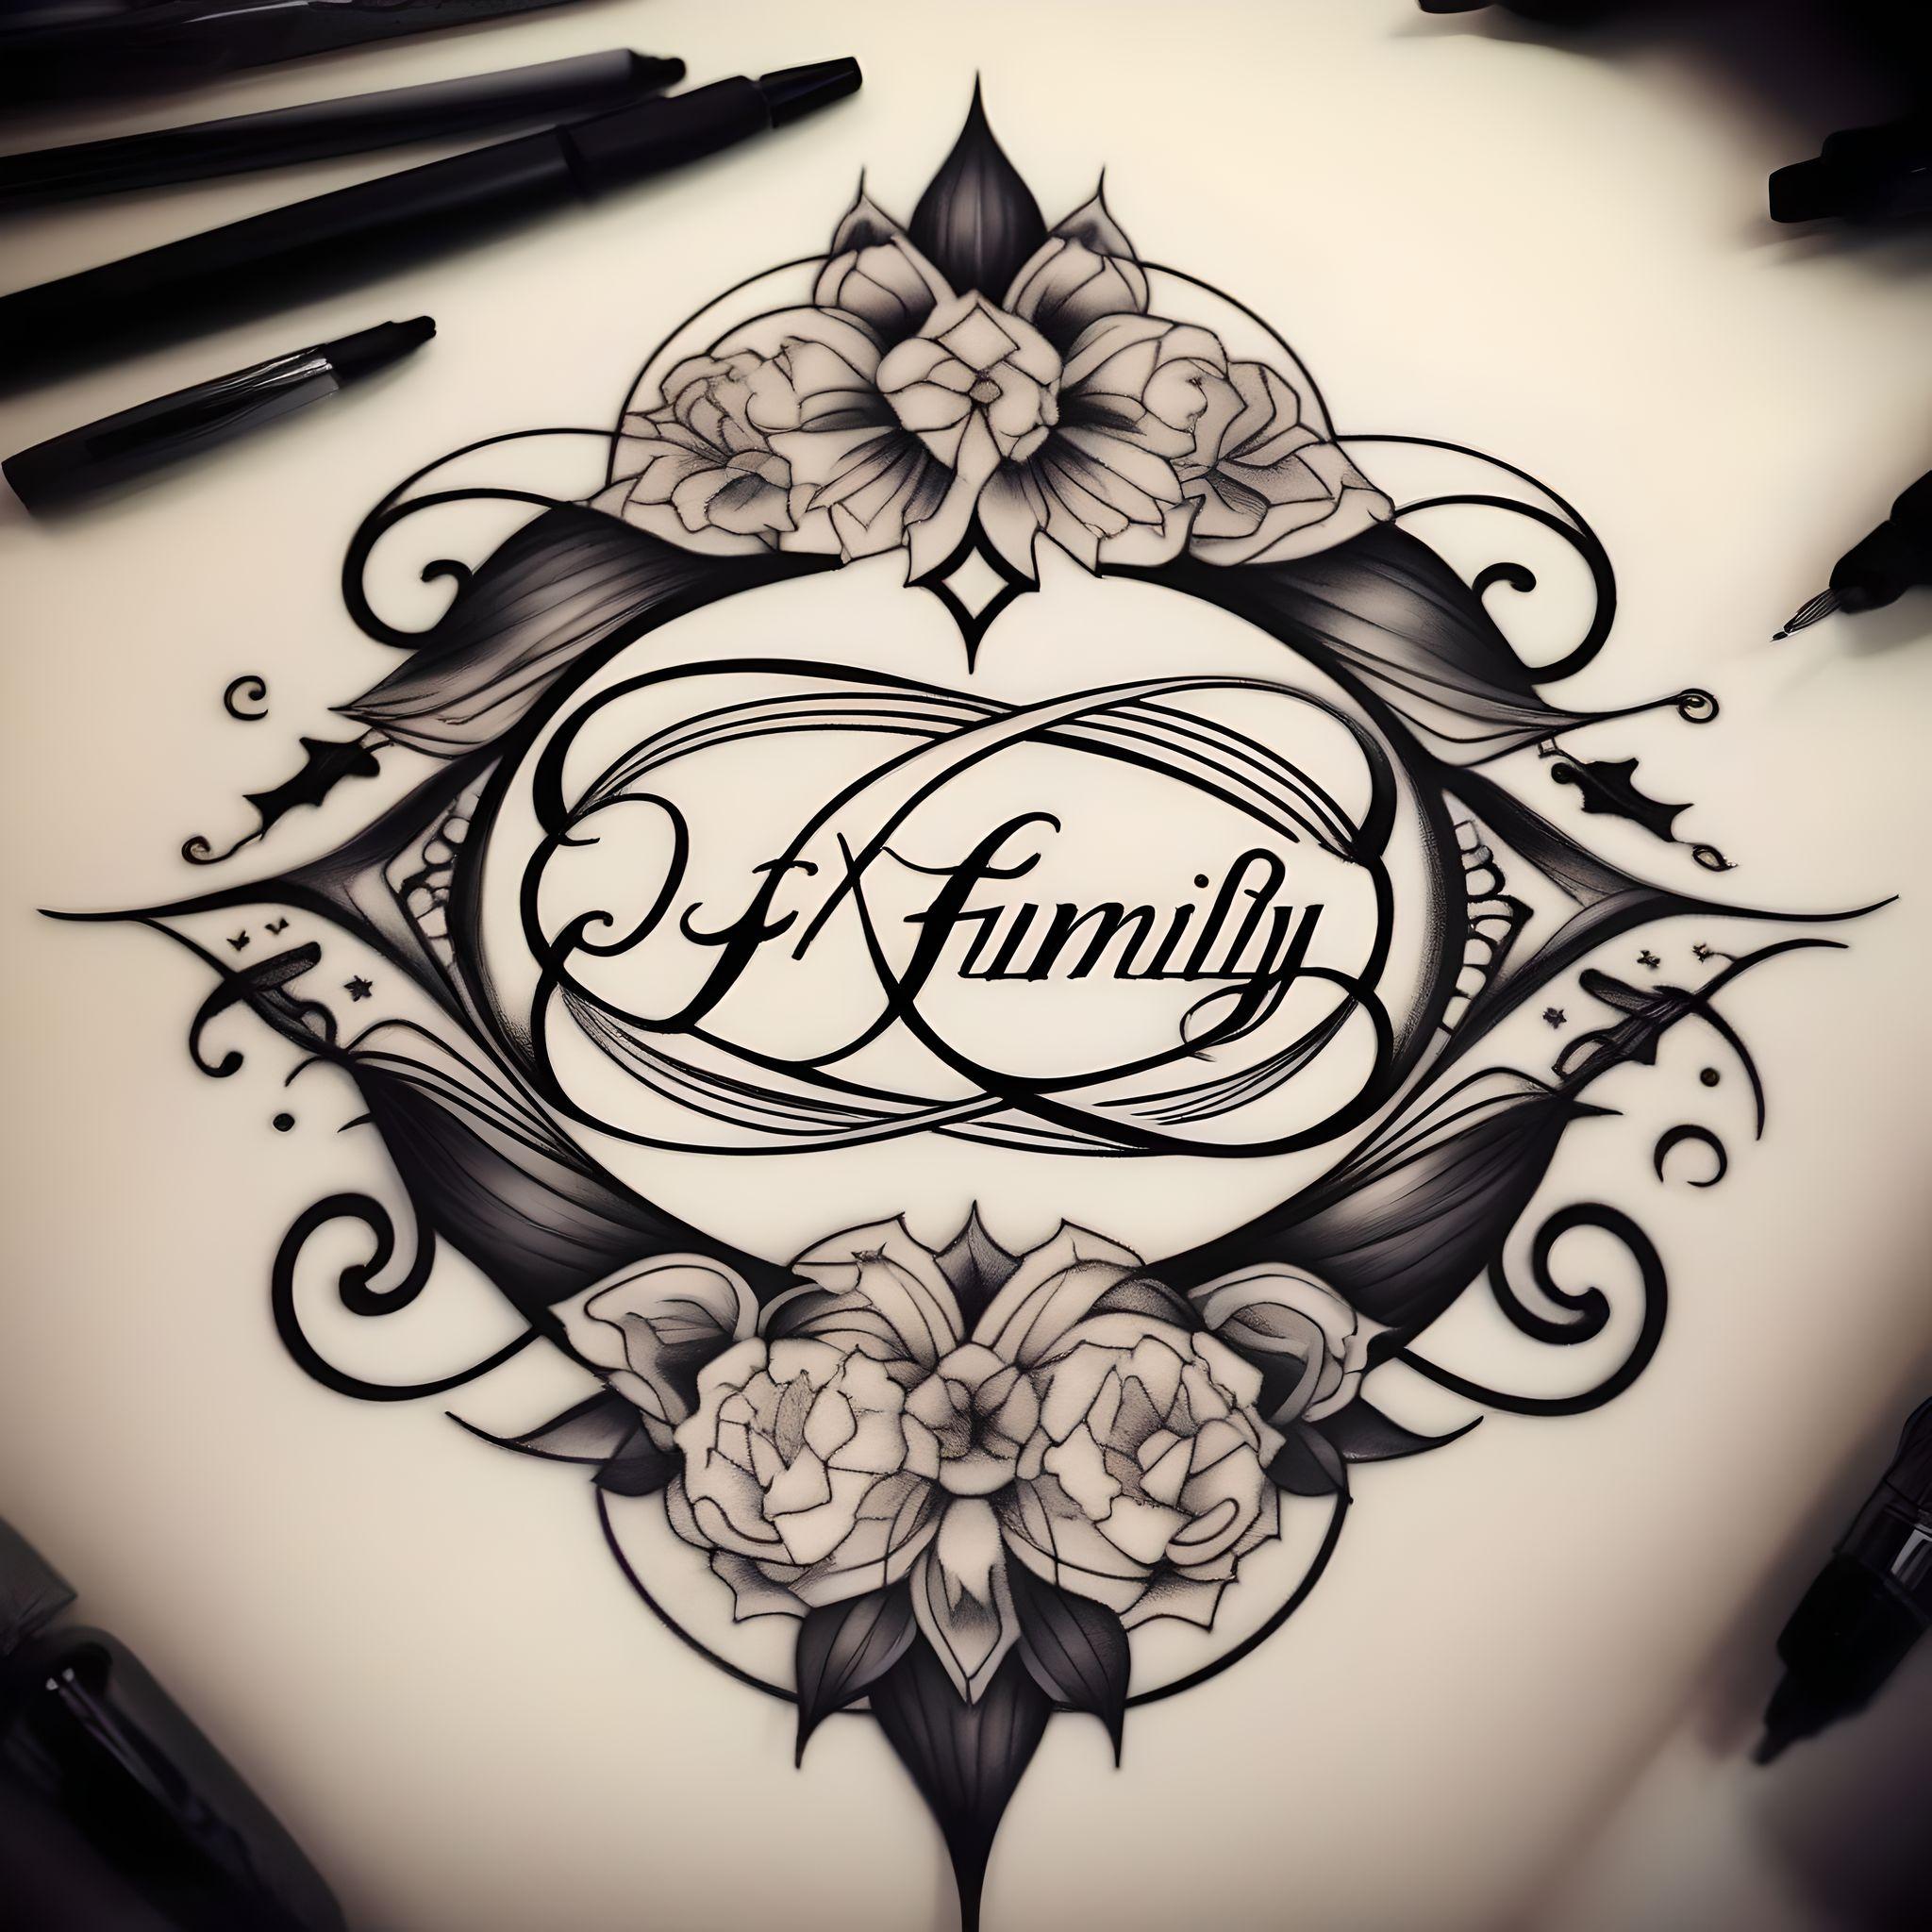 Cute Looking Full Family Tattoo for Hand | Tattoo Ink Master